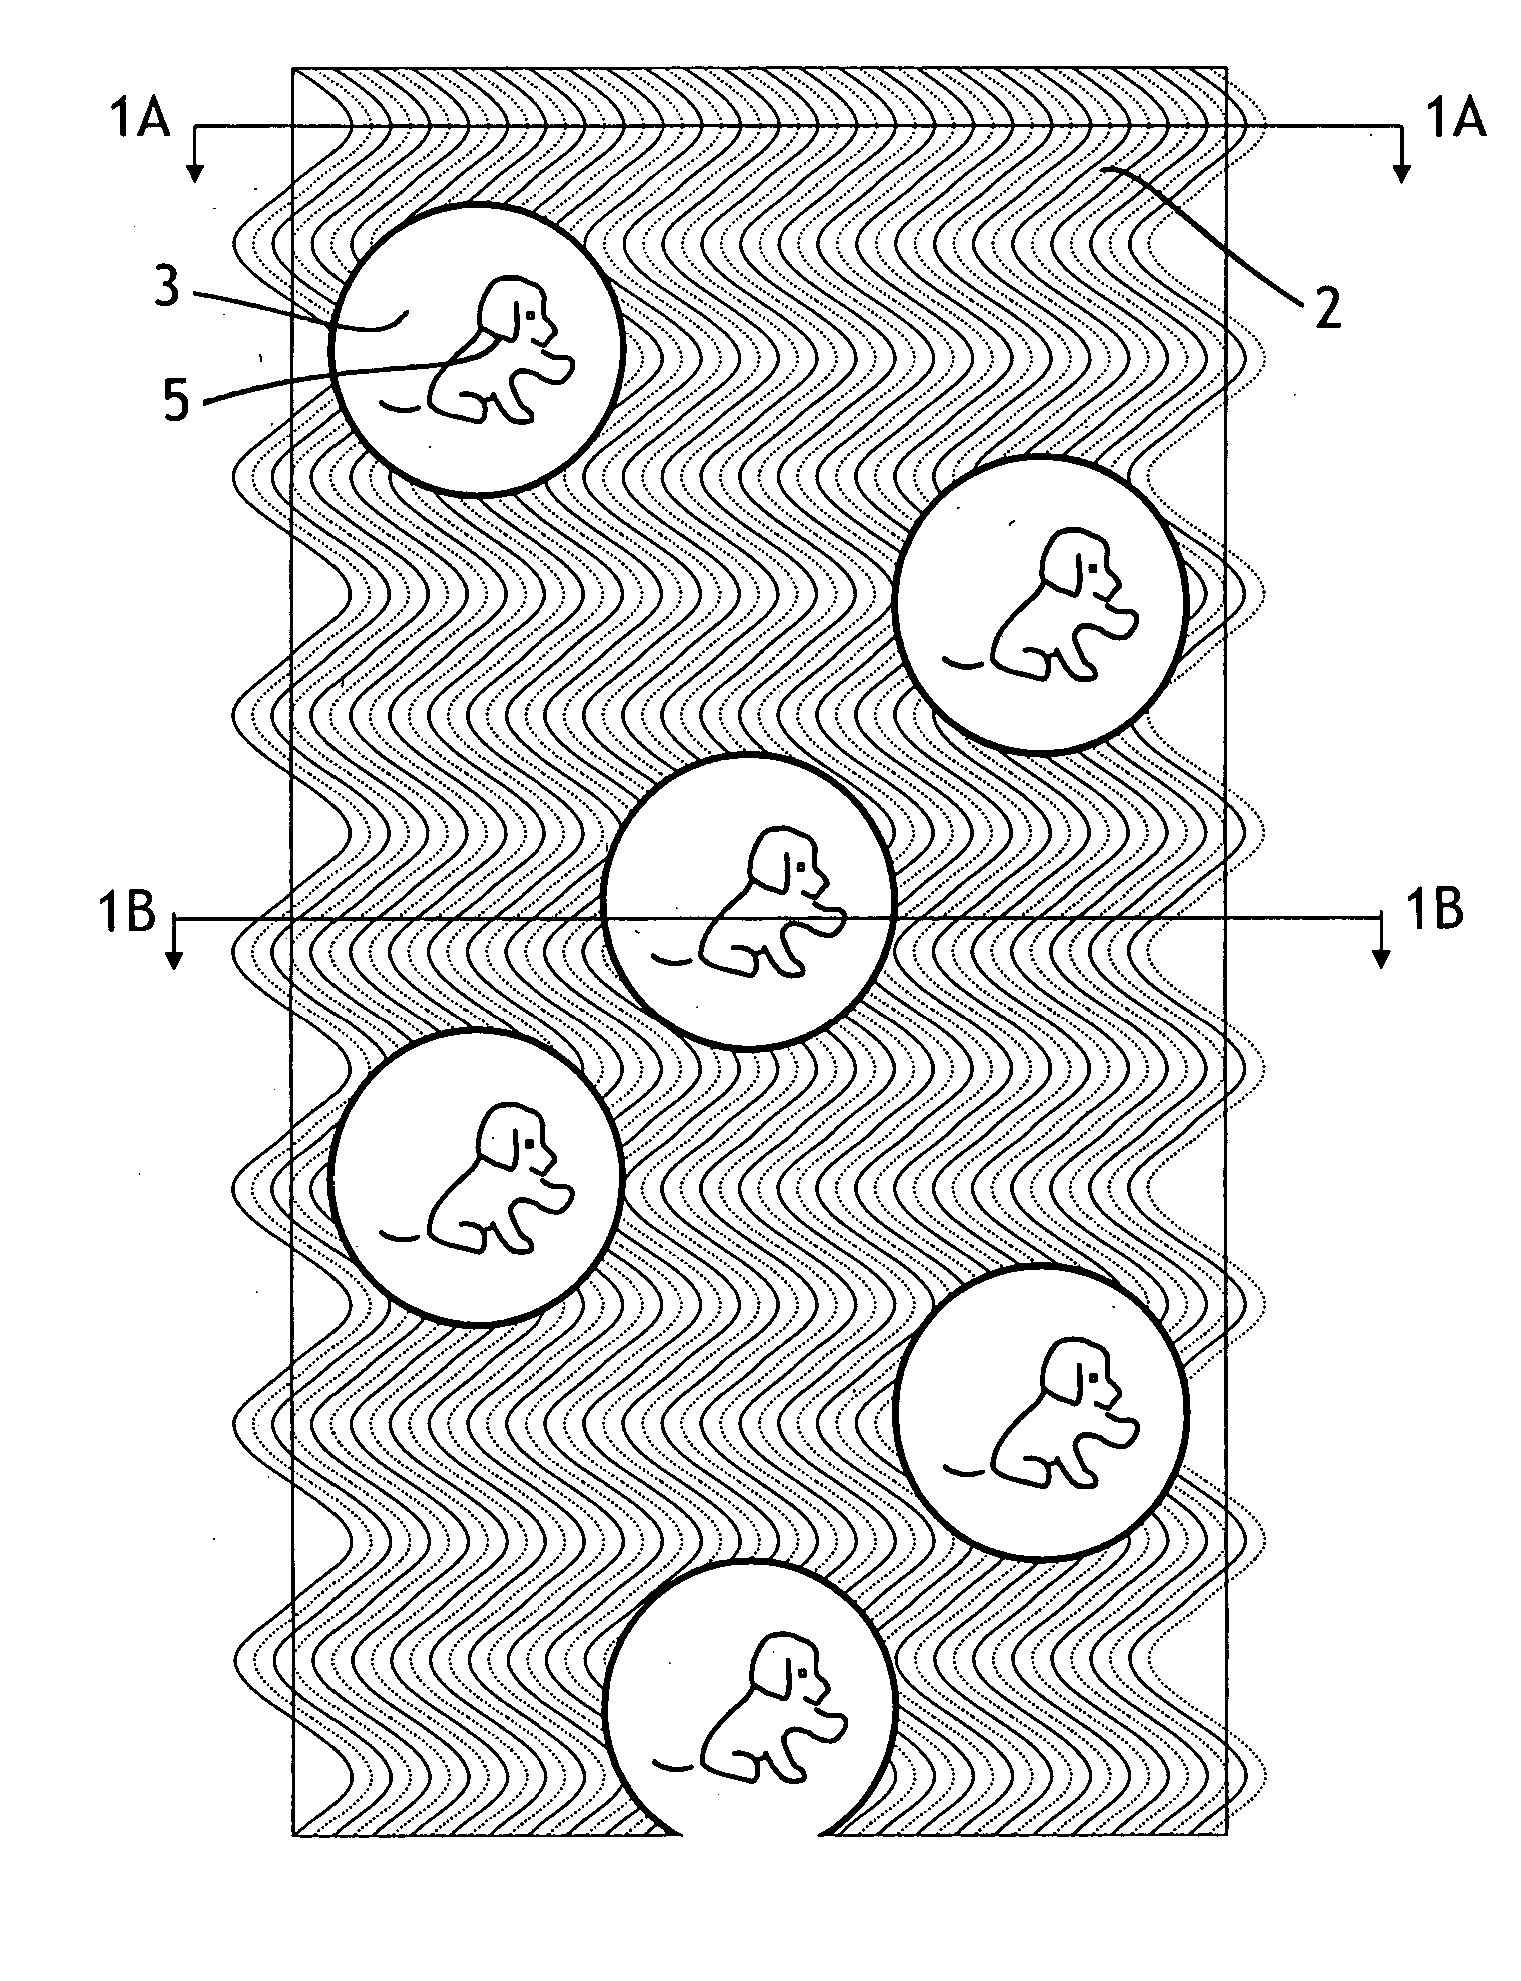 Textured tissue sheets having highlighted design elements